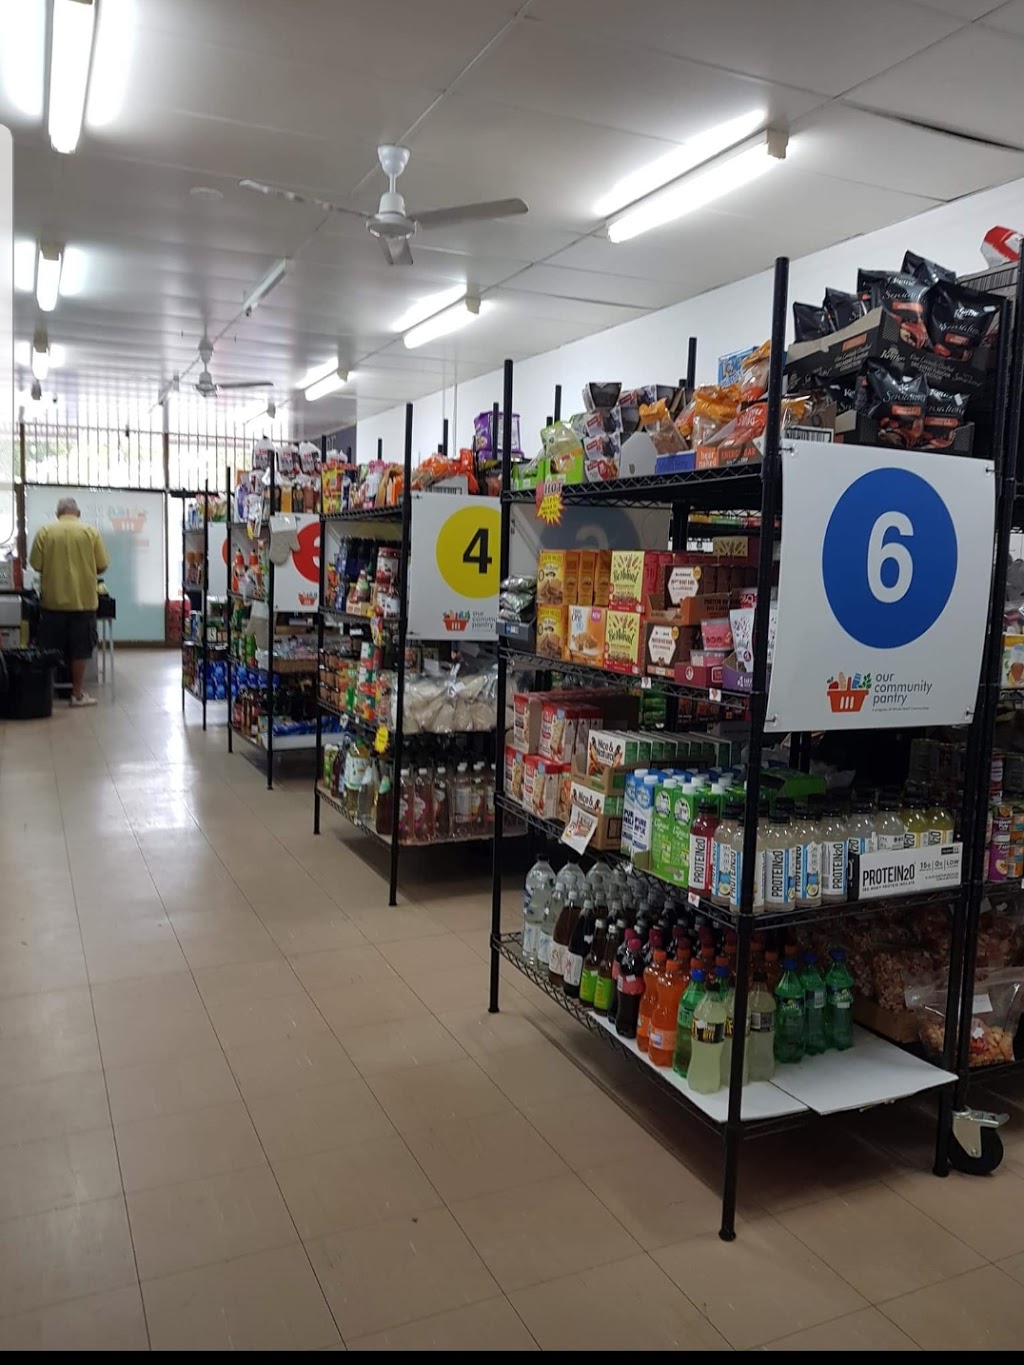 Our Community Pantry | supermarket | 223 Great Southern Rd, Bargo NSW 2574, Australia